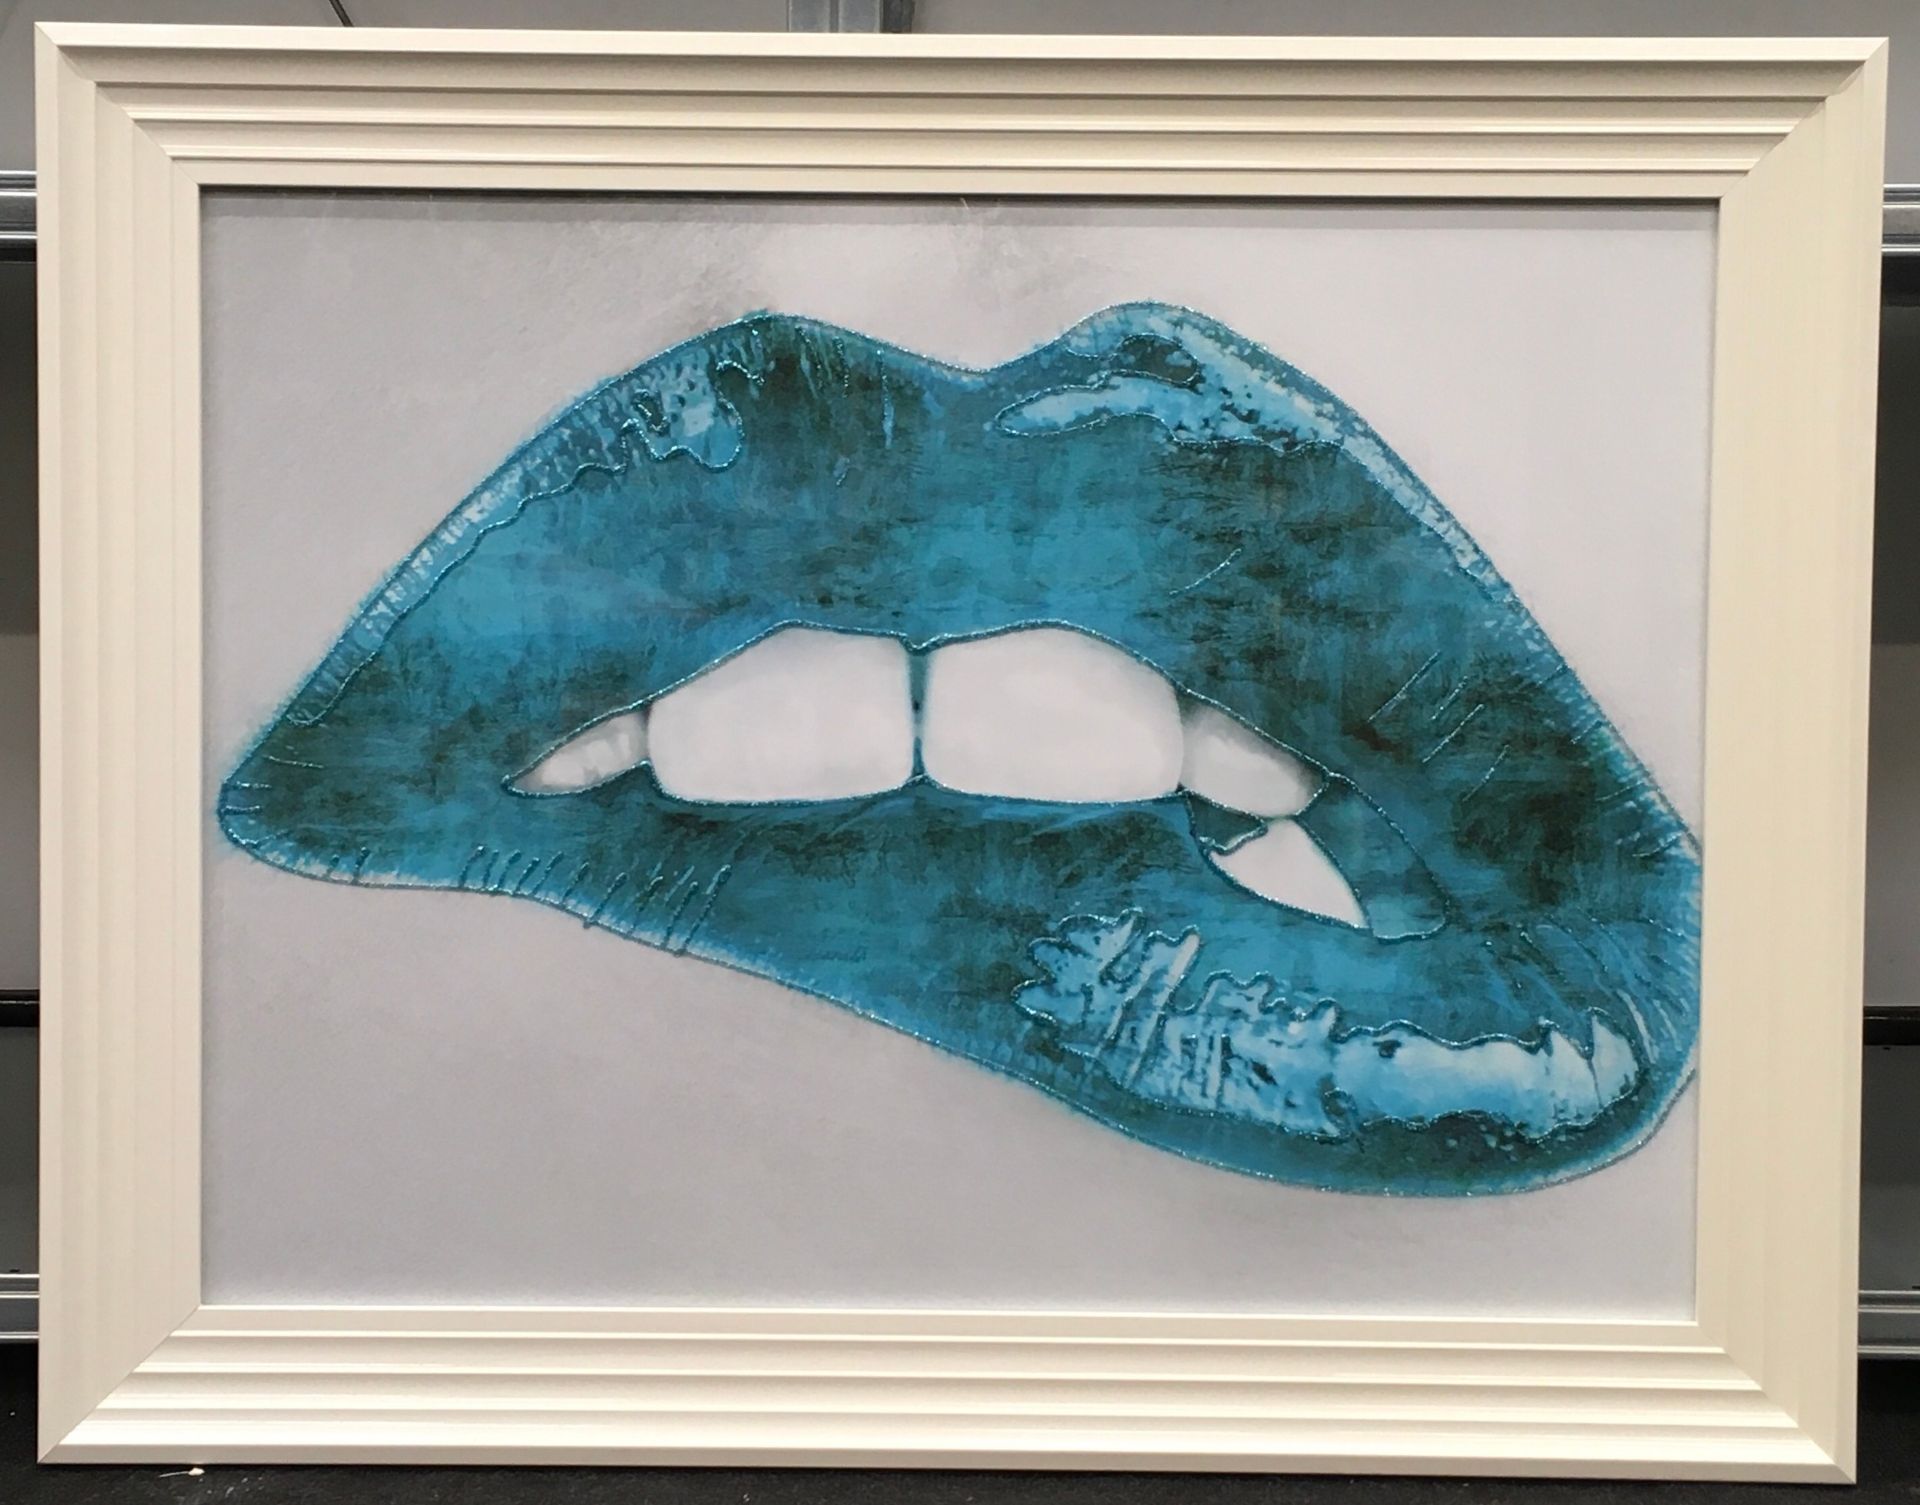 Framed and glazed pop art picture of a pair of lips 75x95cm.